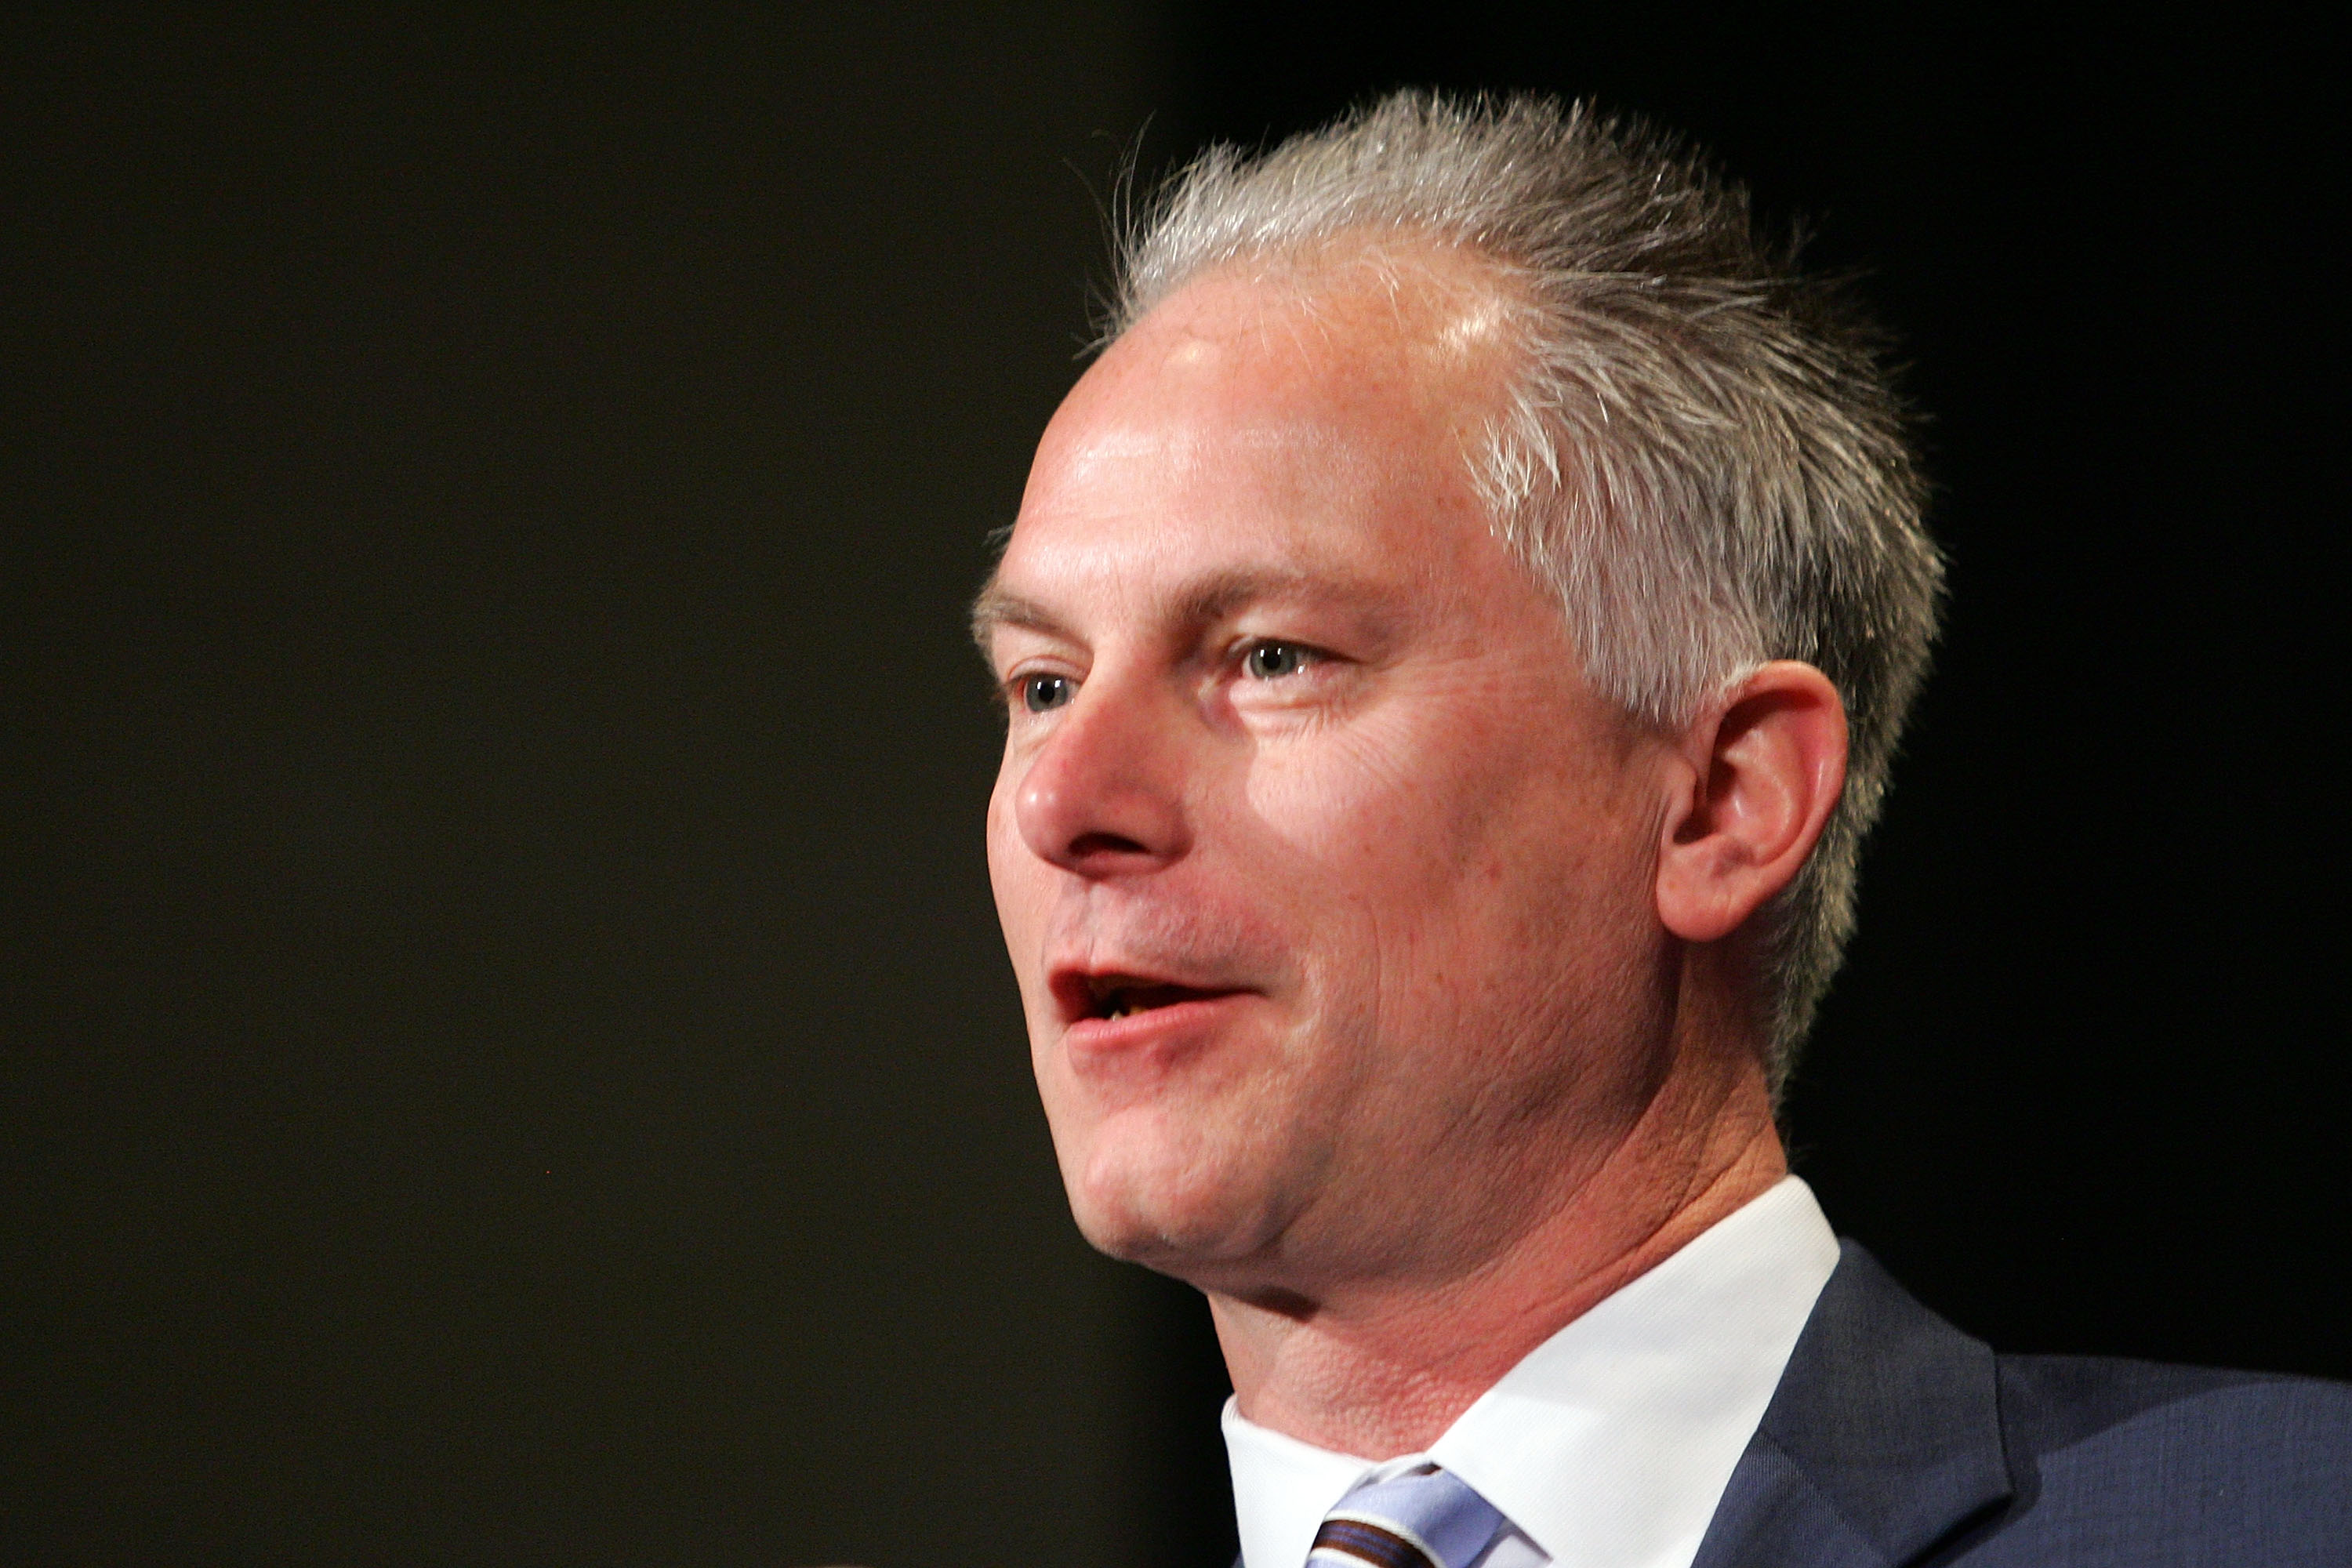 PHOENIX - JANUARY 31:  Kenny Mayne of ESPN asks a question during the GMC Defensive Player of the Year award news conference prior to Super Bowl XLII at the Phoenix Convention Center on January 31, 2008 in Phoenix, Arizona.  (Photo by Streeter Lecka/Getty